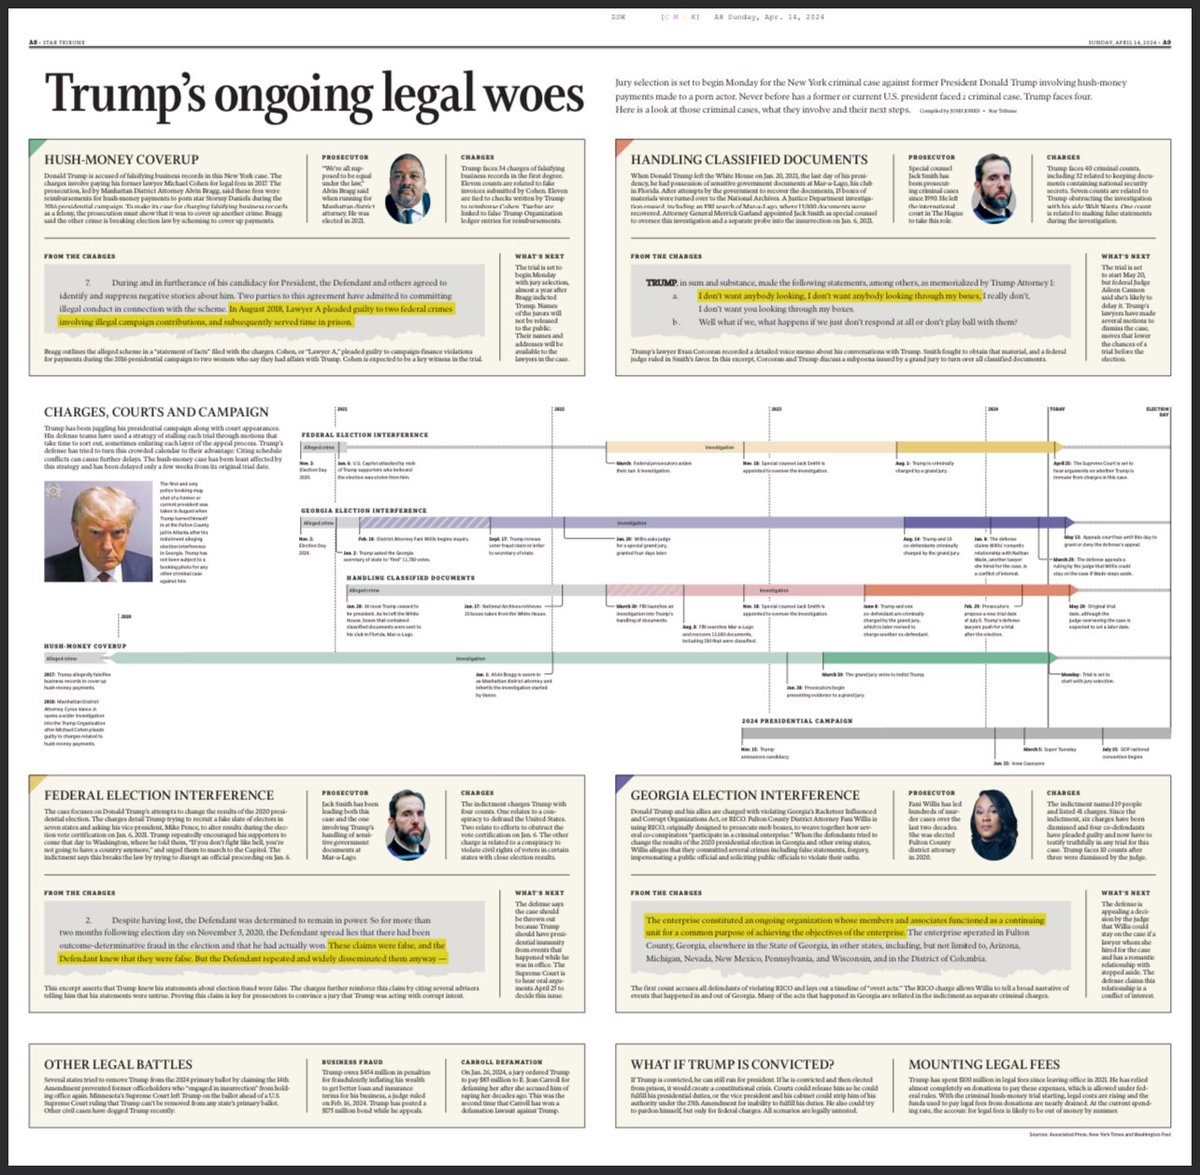 Jury selection is set to begin tomorrow in the New York criminal case against former President Donald Trump. In today’s @StarTribune, @JonesJoshL breaks down Trump’s ongoing legal woes and where they stand. Read it here: startribune.com/trumps-ongoing…